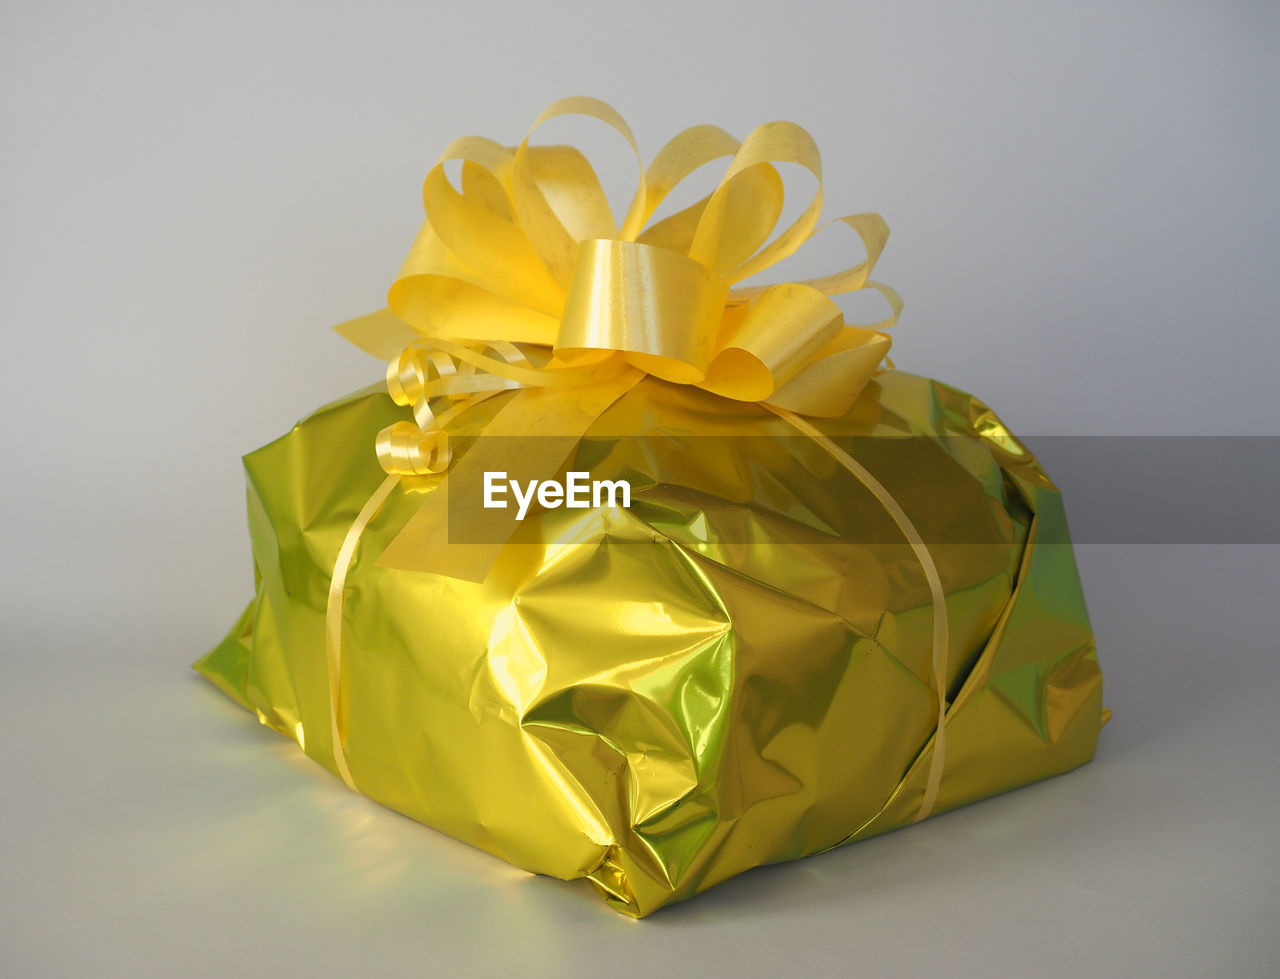 yellow, studio shot, gift, paper, gold, petal, flower, indoors, art, gray background, celebration, no people, single object, ribbon, origami paper, surprise, origami, wrapping paper, shiny, wrapped, wealth, gray, cut out, bow, luxury, box, emotion, holiday, colored background, tied bow, event